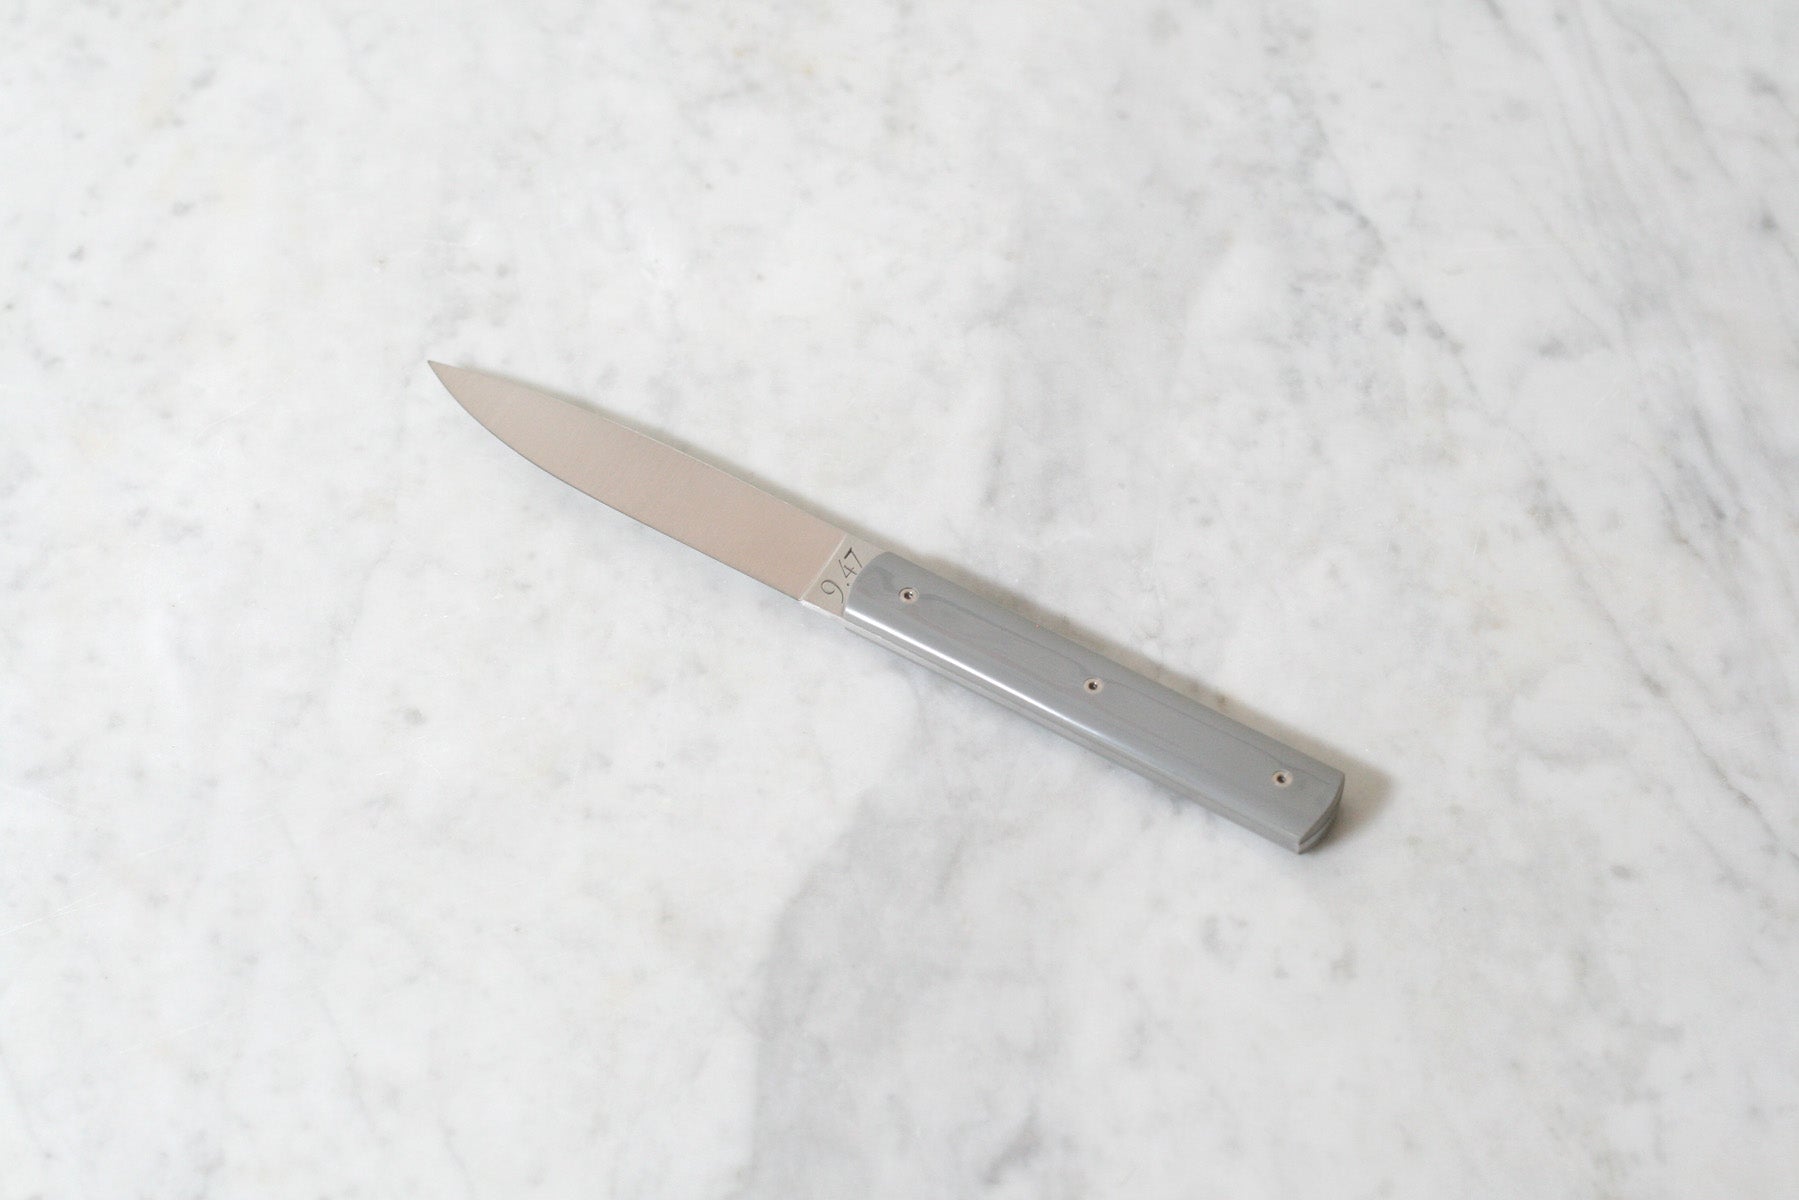 The 9.47 Table Knife